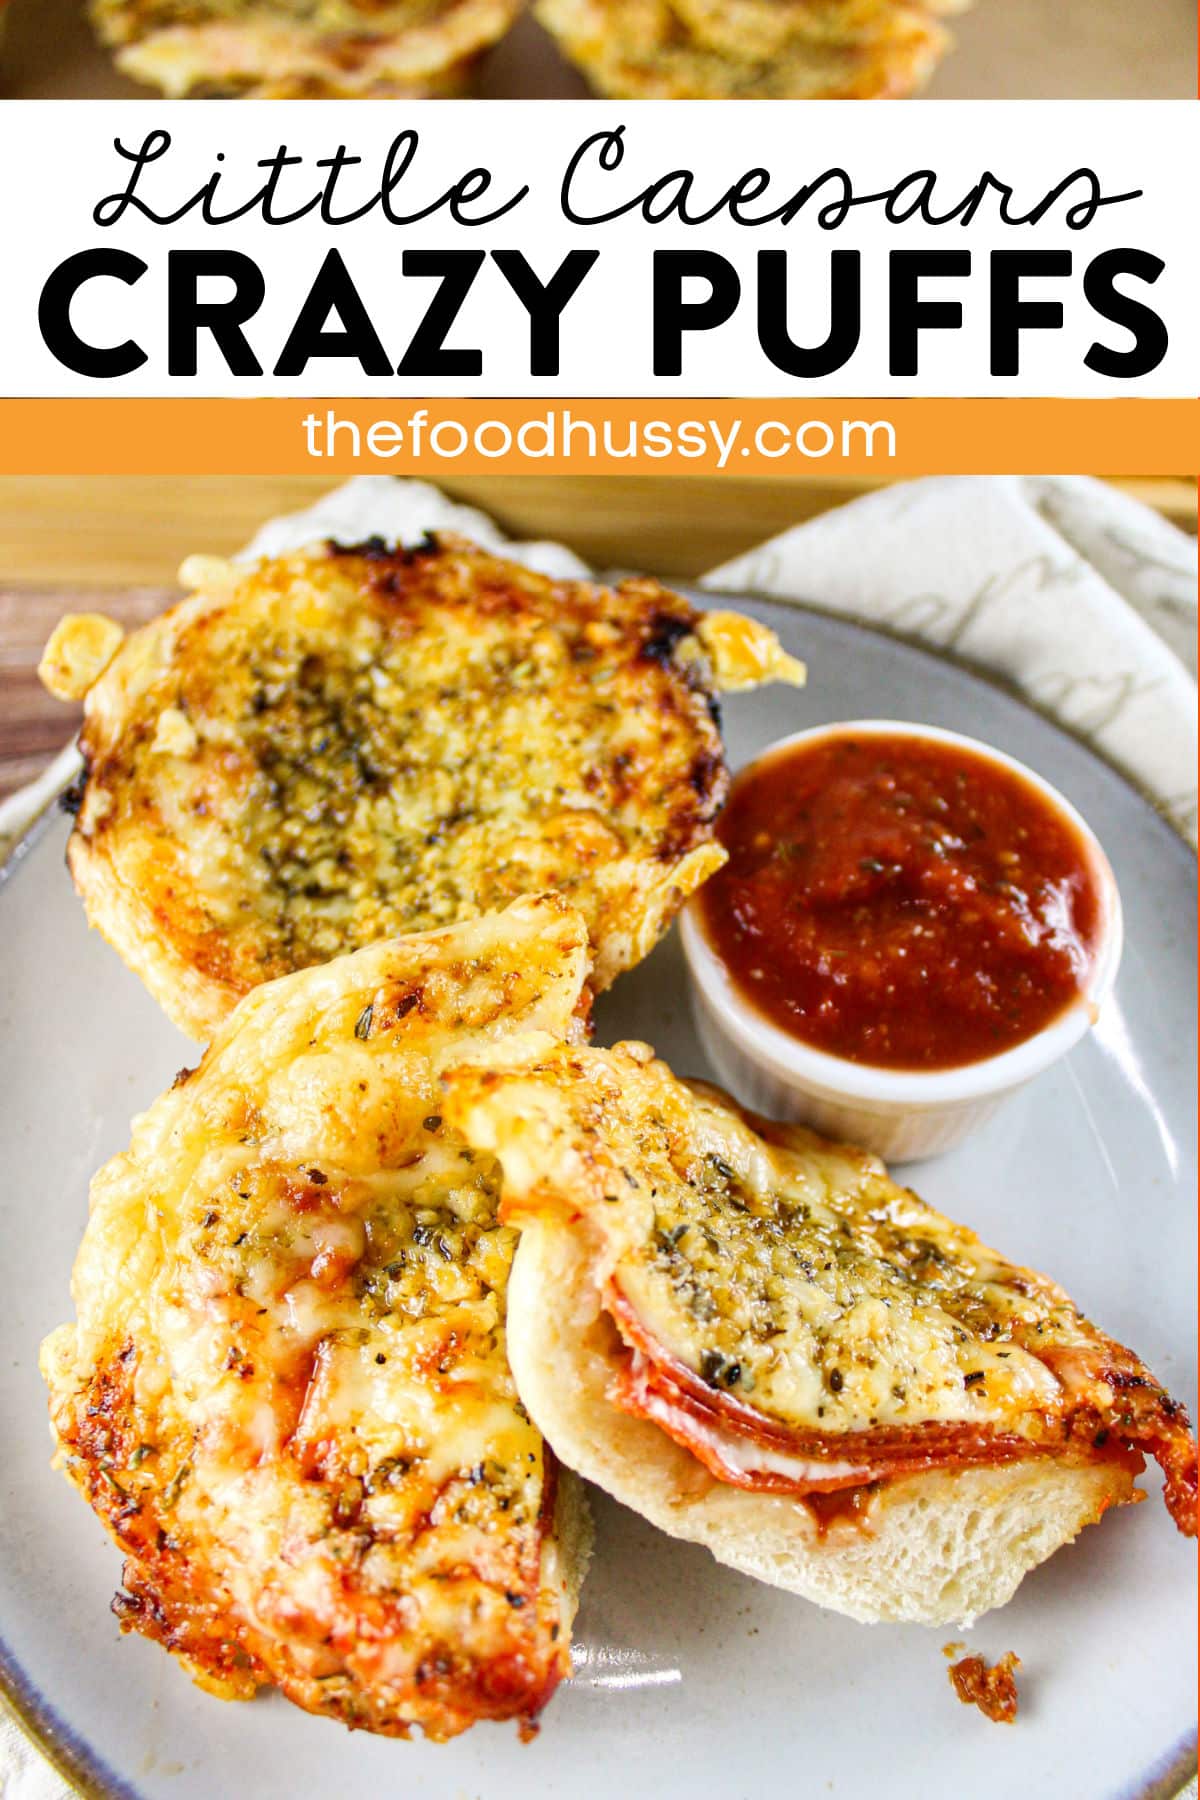 Little Caesars Crazy Puffs are the newest menu item taking social media by storm! Bites of handheld goodness filled with cheesy pepperoni pizza toppings! But guess what - you can make them at hot-n-ready AT HOME for less $$!  via @foodhussy